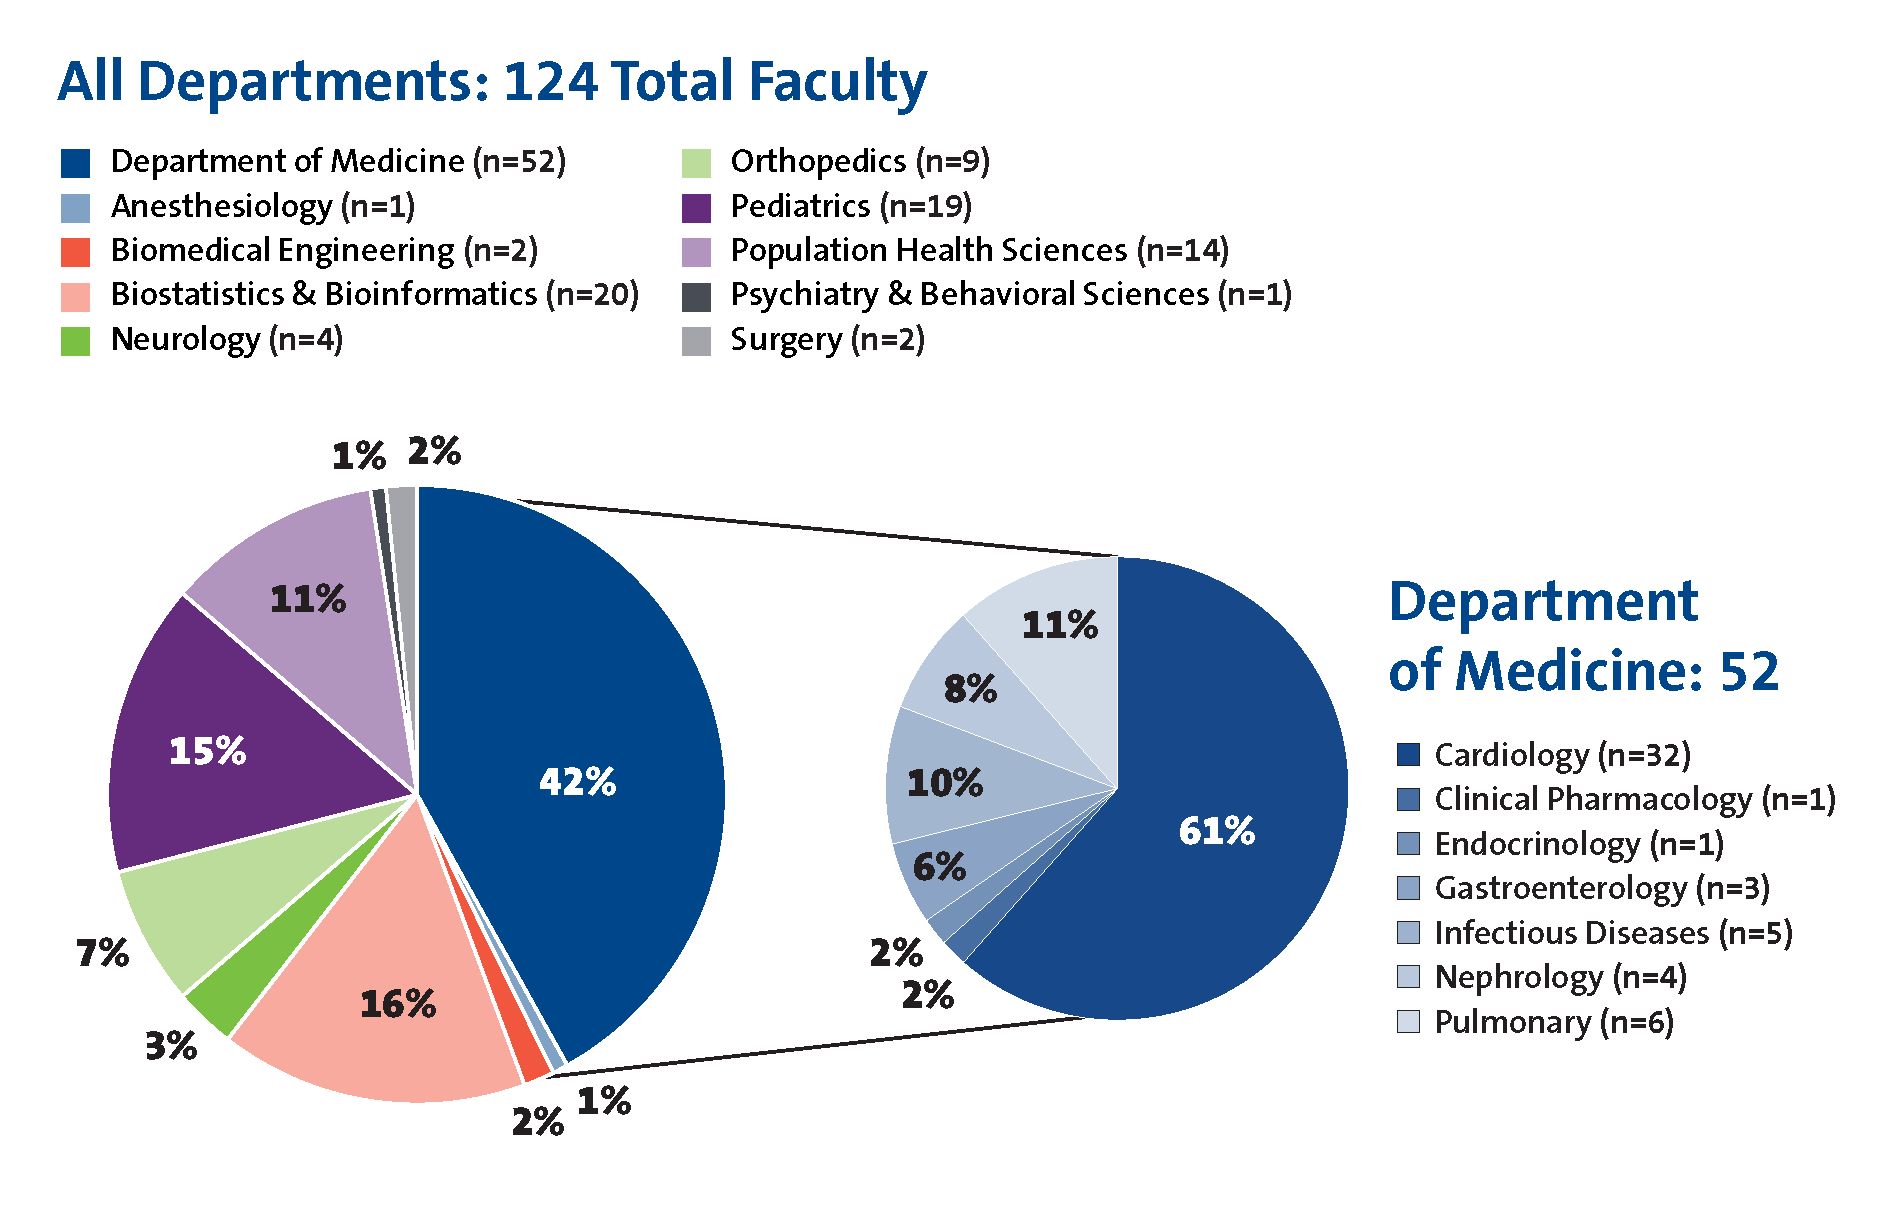 This chart demonstrates the primary department breakdown of all 124 DCRI faculty. This breakdown includes: Department of Medicine (n=52); Anesthesiology (n=1); Biomedical Engineering (n=2); Biostatistics & Bioinformatics (n=20); Neurology (n=4); Orthopedics (n=9); Pediatrics (n=19); Population Health Sciences (n=14); Psychiatry & Behavioral Sciences (n=1); and Surgery (n=2). The Department of Medicine's 52 faculty come from the following divisions: Cardiology (n=32); Clinical Pharmacology (n=1); Endocrinolo